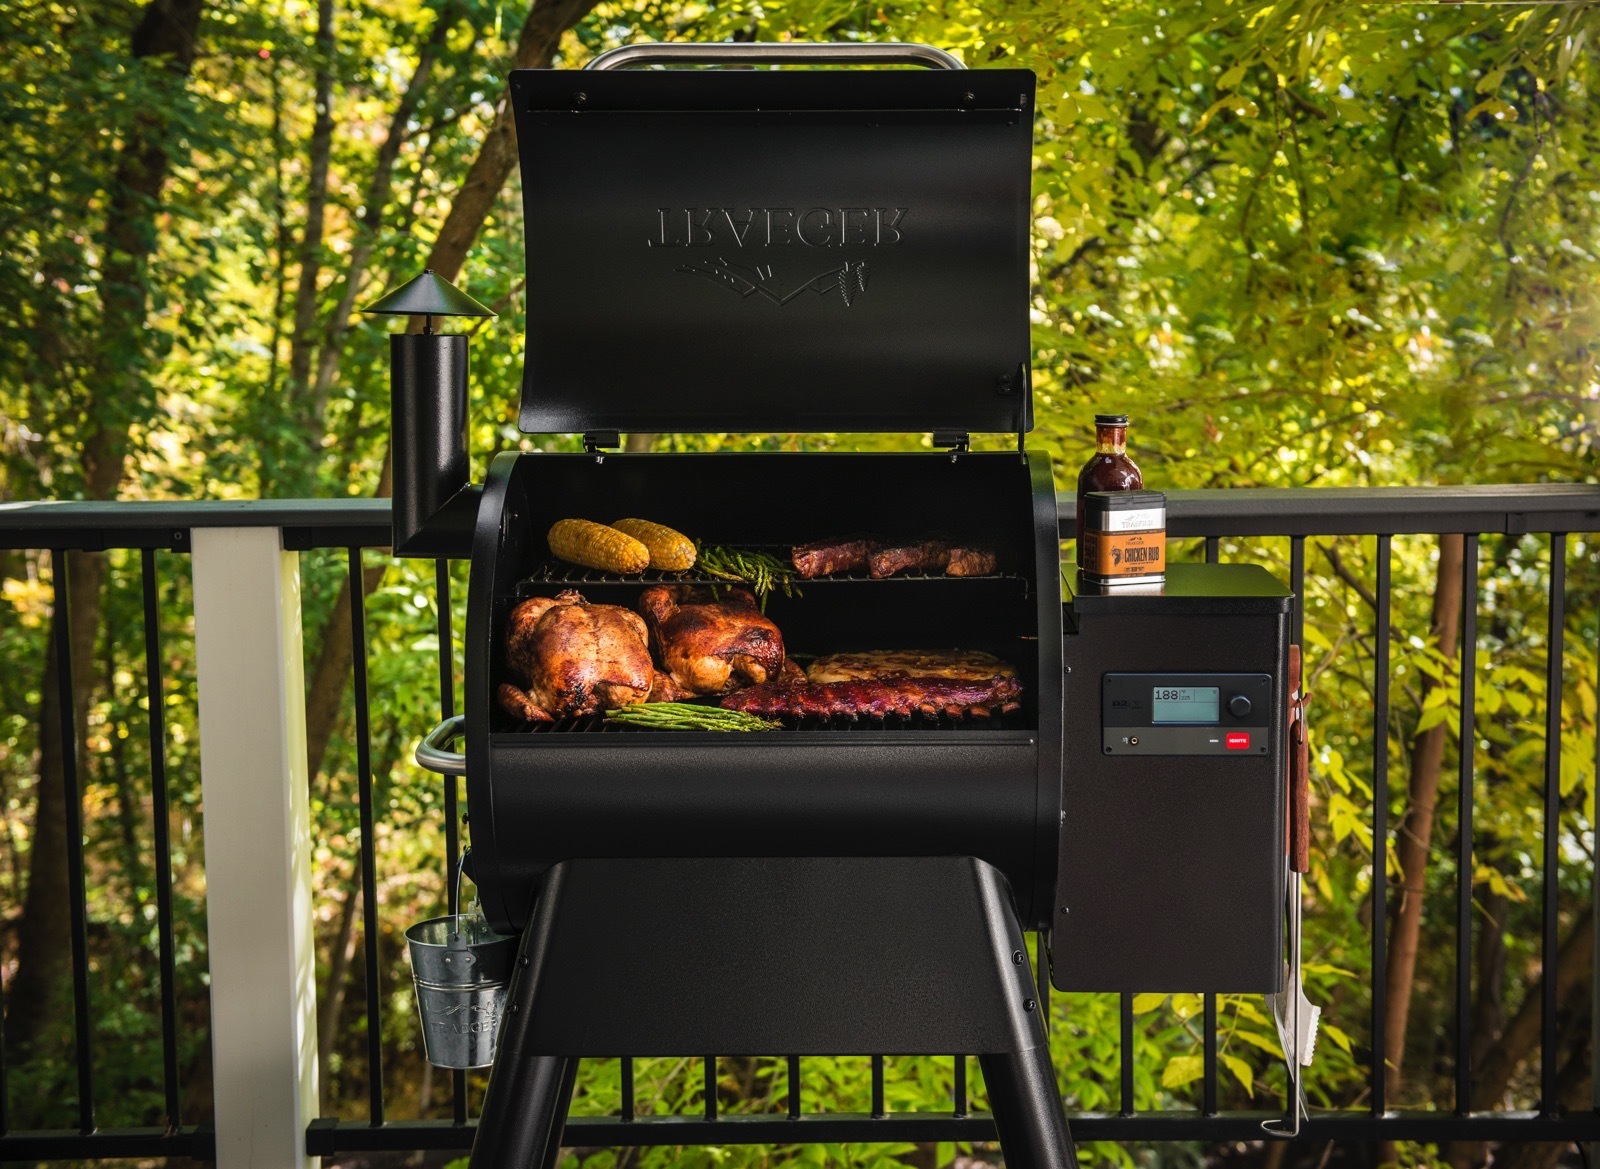 Traeger is integrating Wi-Fi into grills in ways that actually make sense